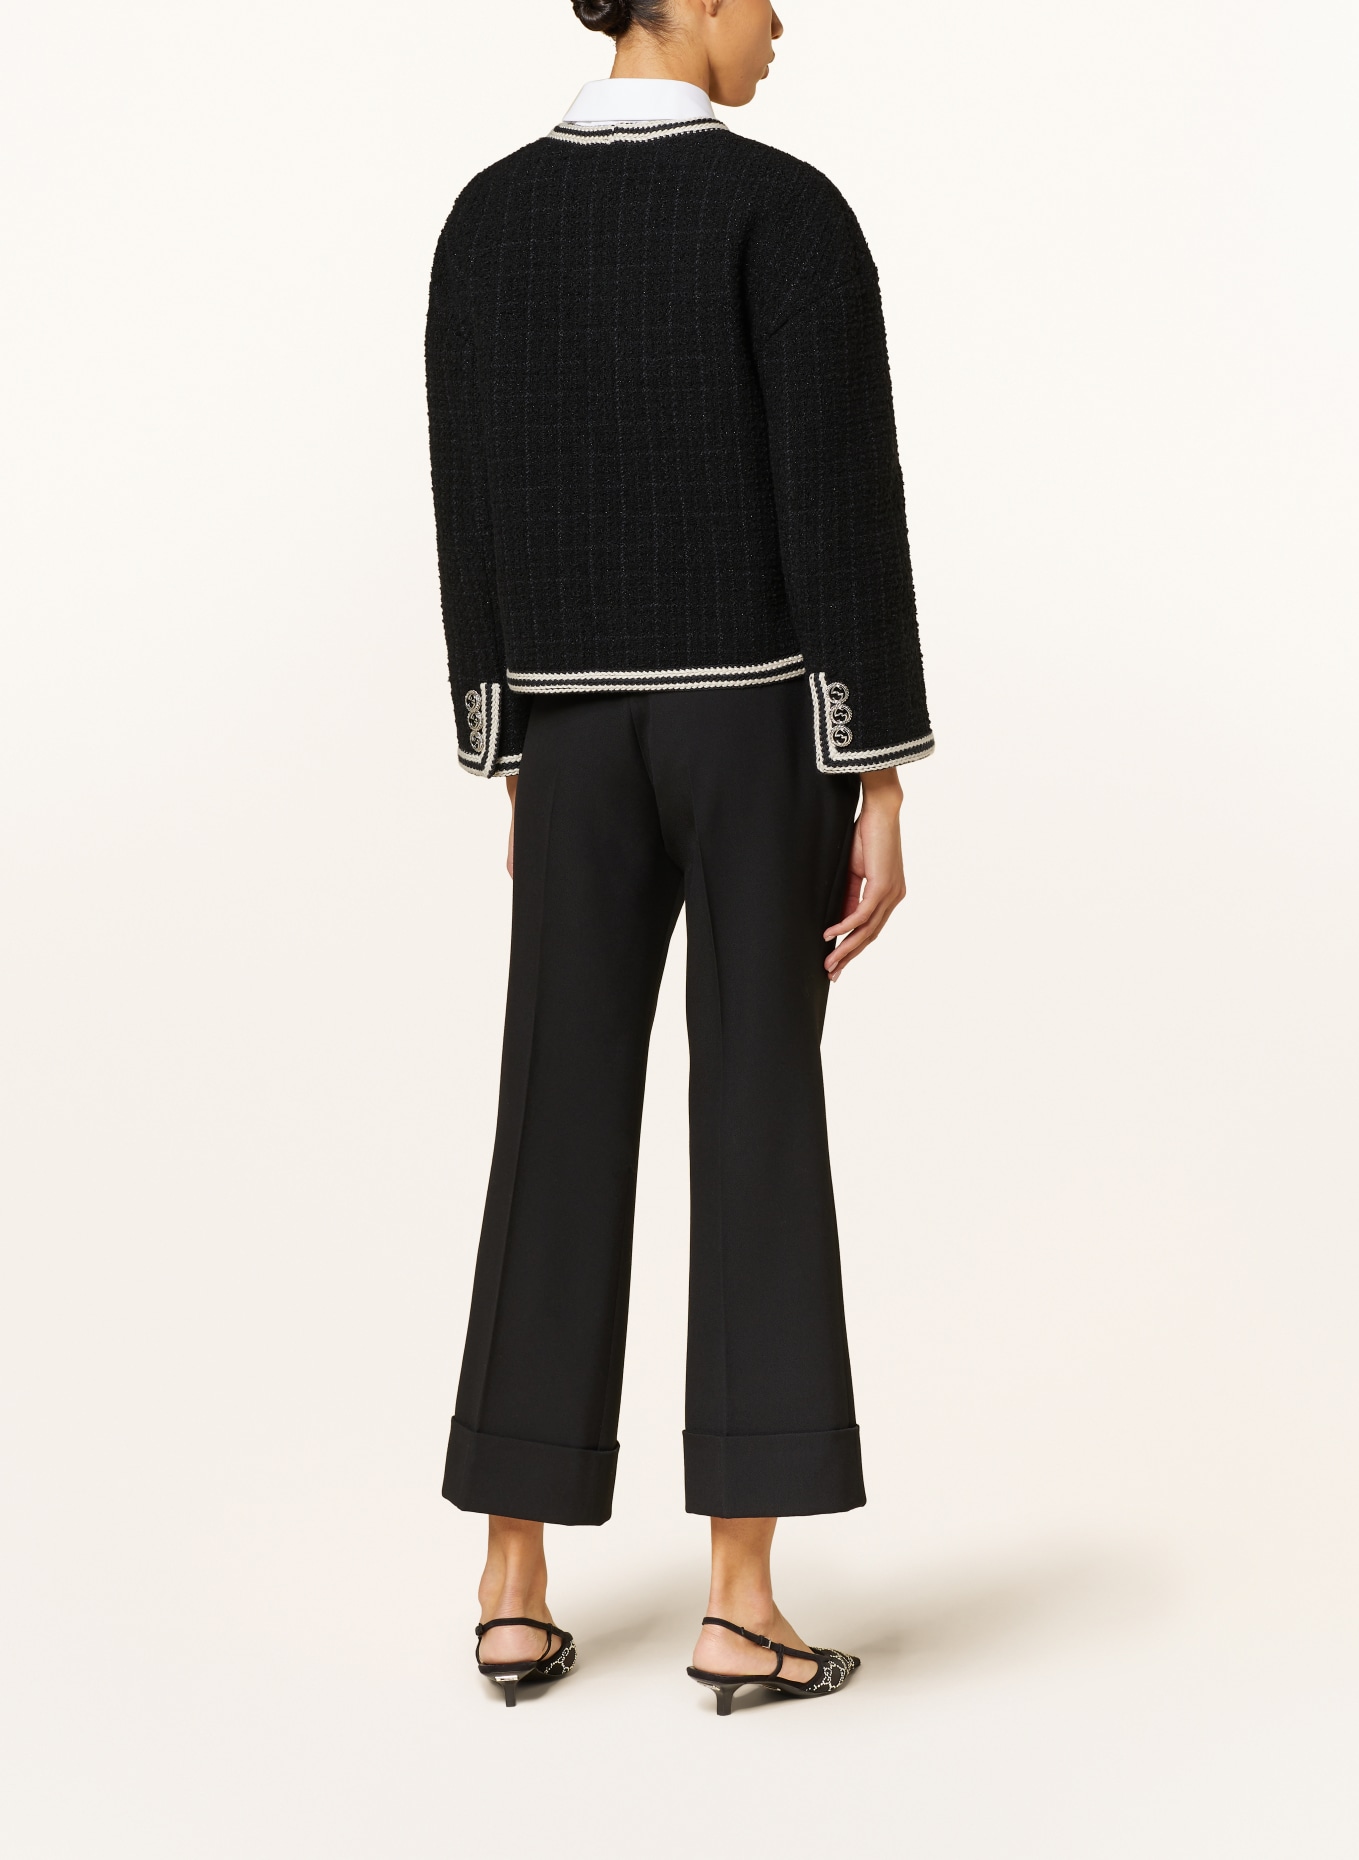 GUCCI Boxy jacket DAMIER made of tweed, Color: BLACK/ WHITE (Image 3)